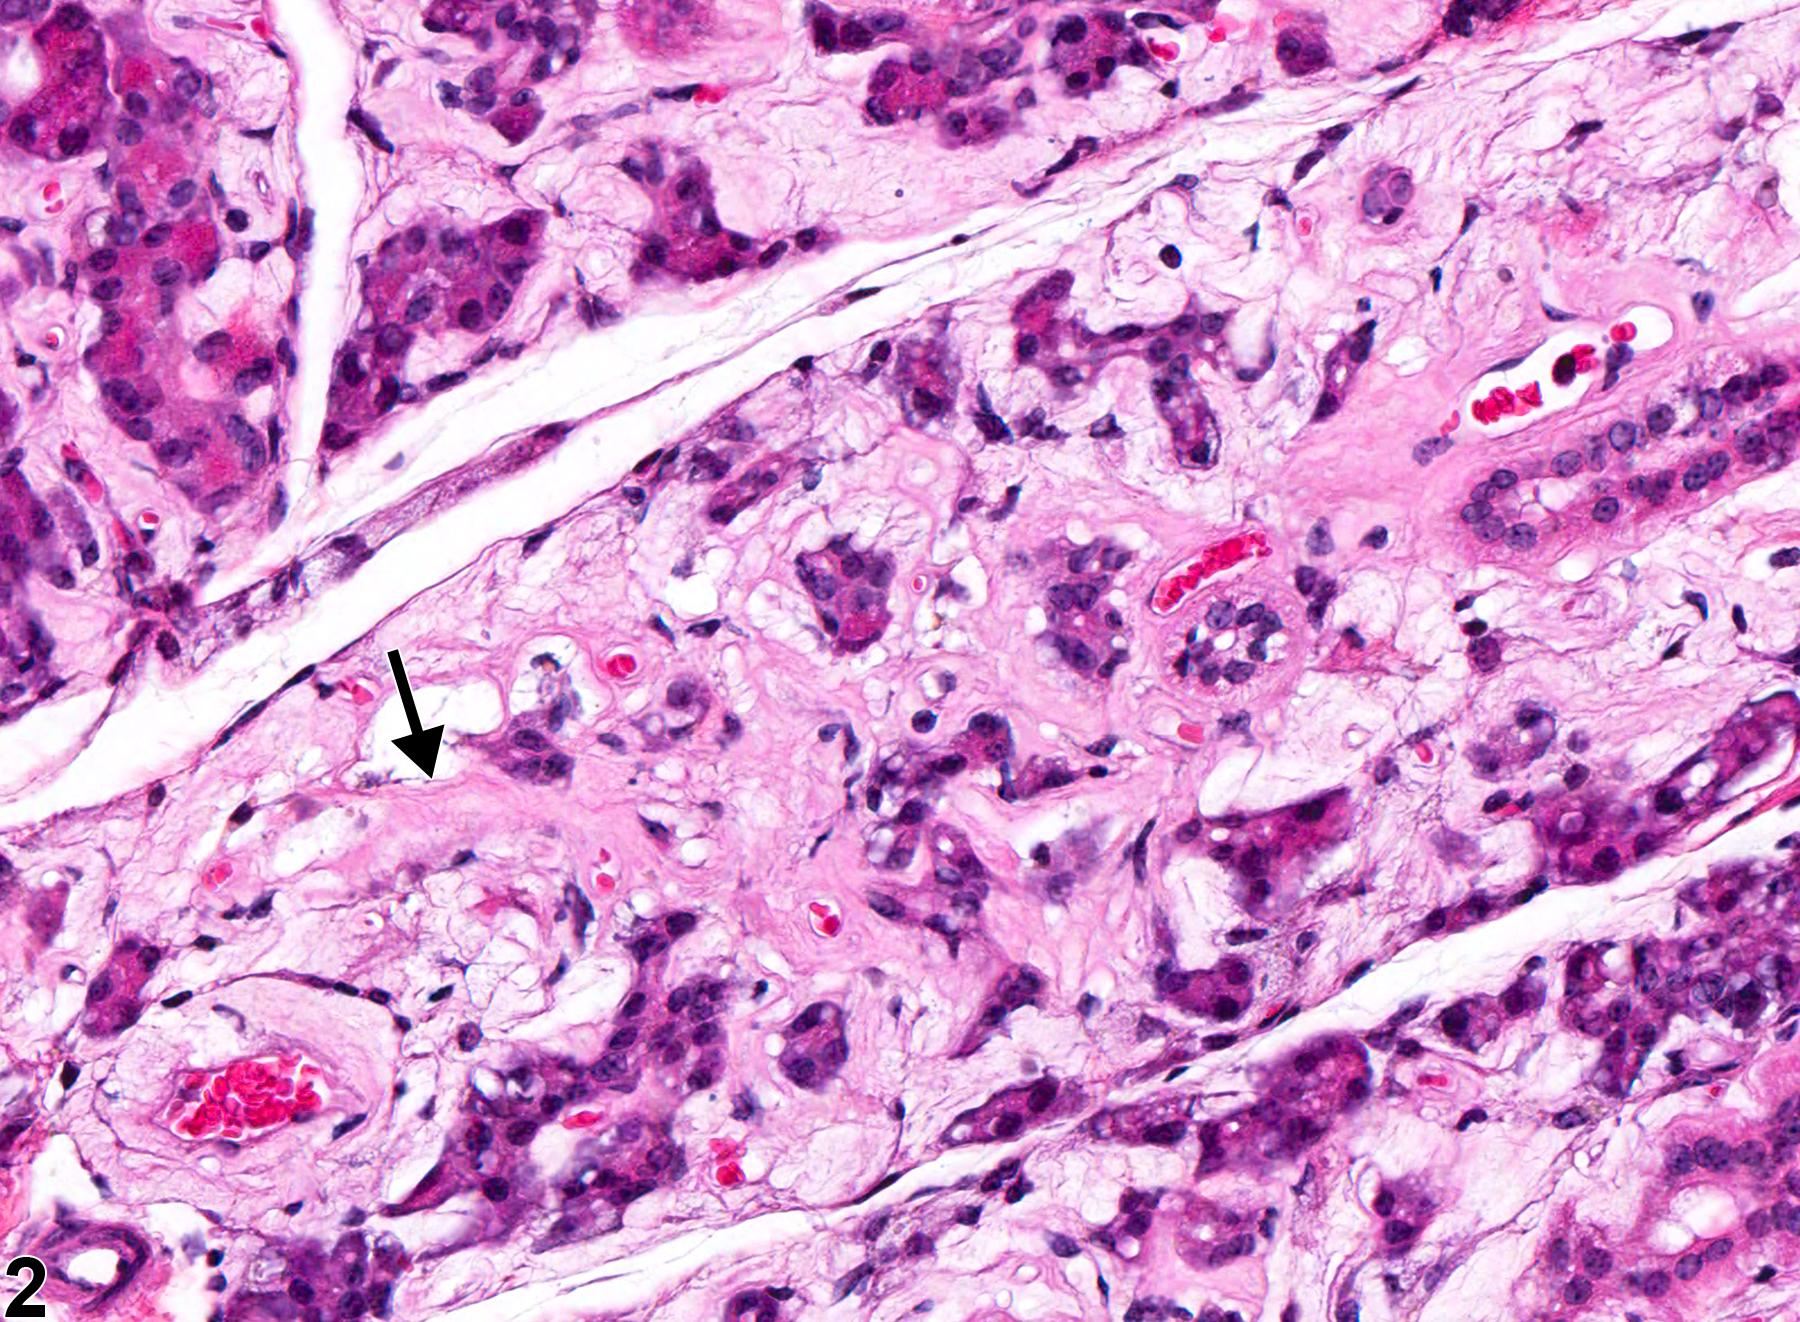 Image of amyloid in the salivary gland from a female Swiss Webster mouse in a chronic study